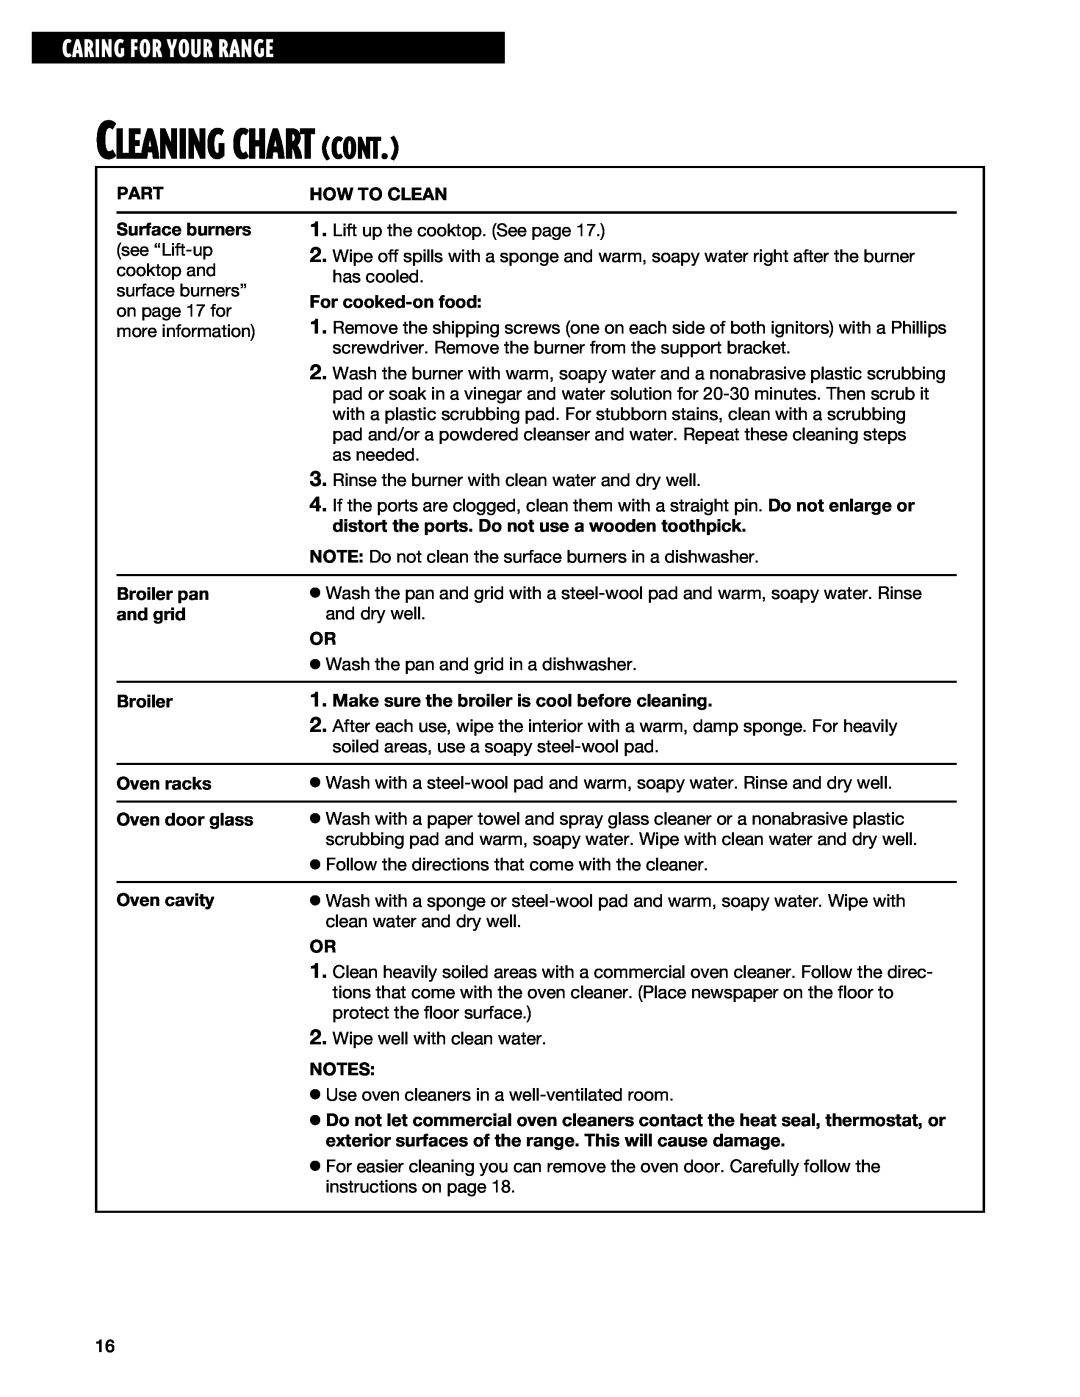 Whirlpool TGP325E manual Cleaning Chart Cont, Caring For Your Range 